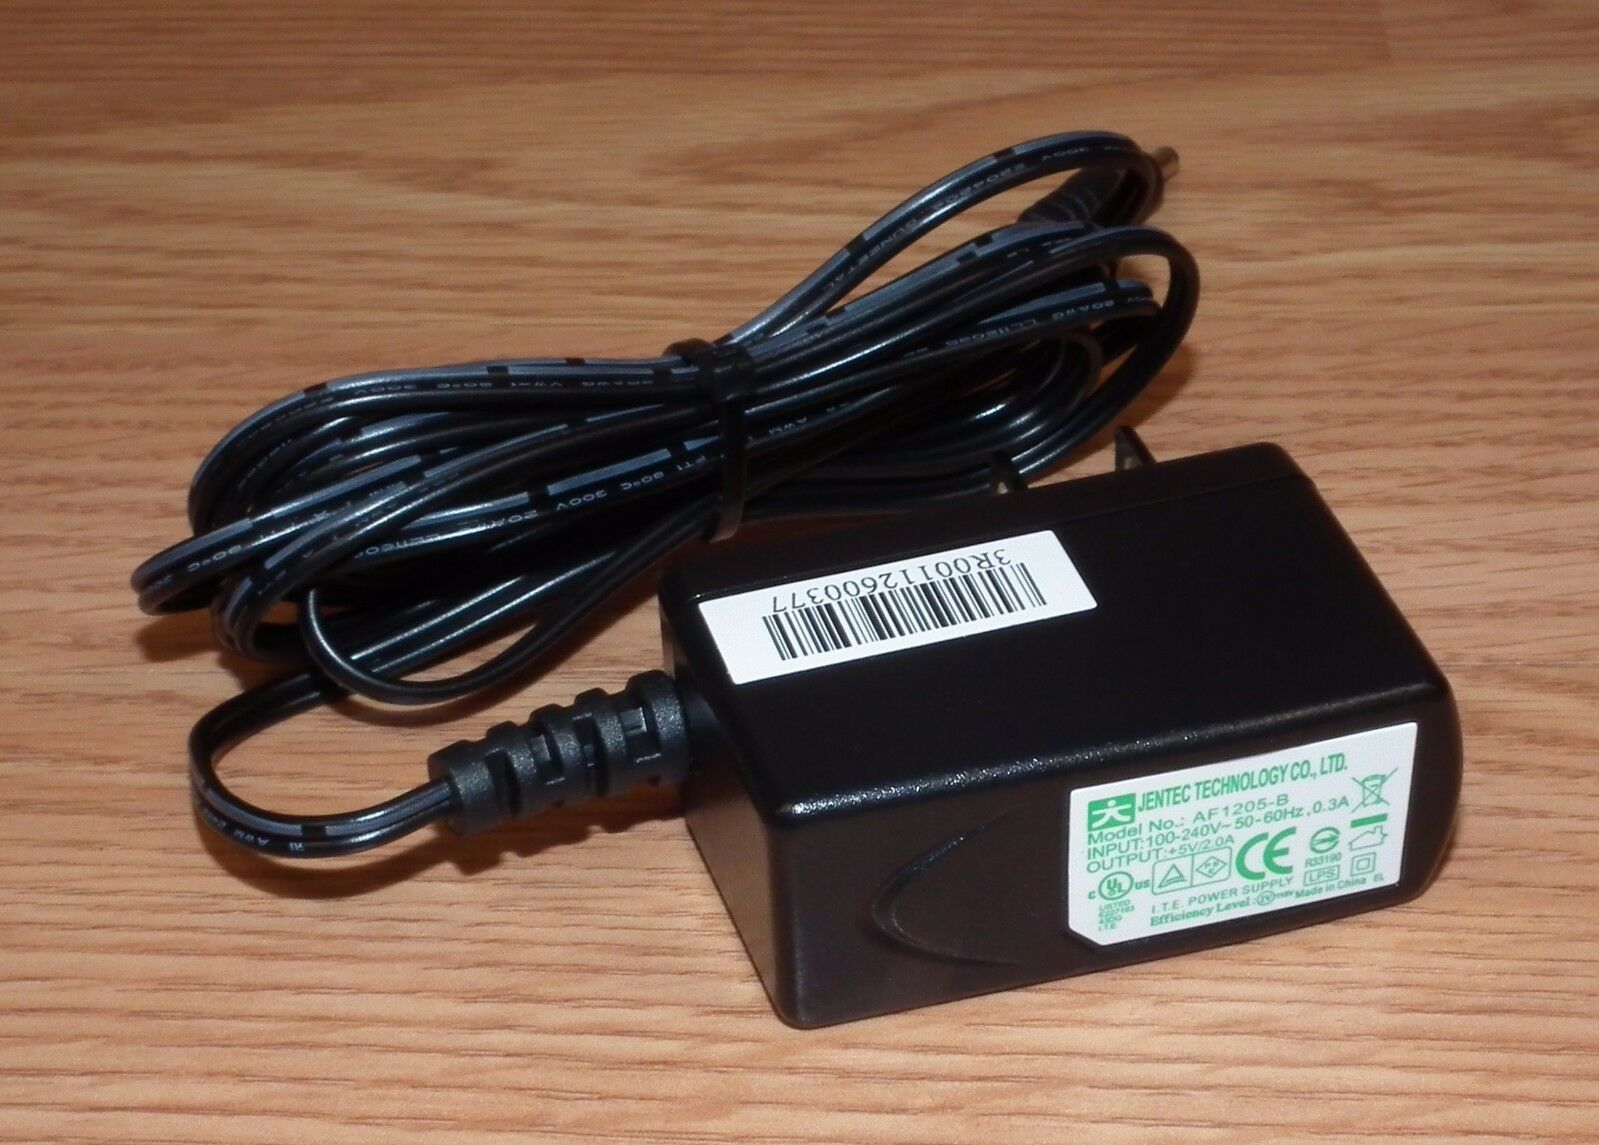 Genuine Jentec (AF1205-B) 5V 2.0A 50-60Hz AC Adapter Power Supply Charger Country/Region of Manufacture: China Type: